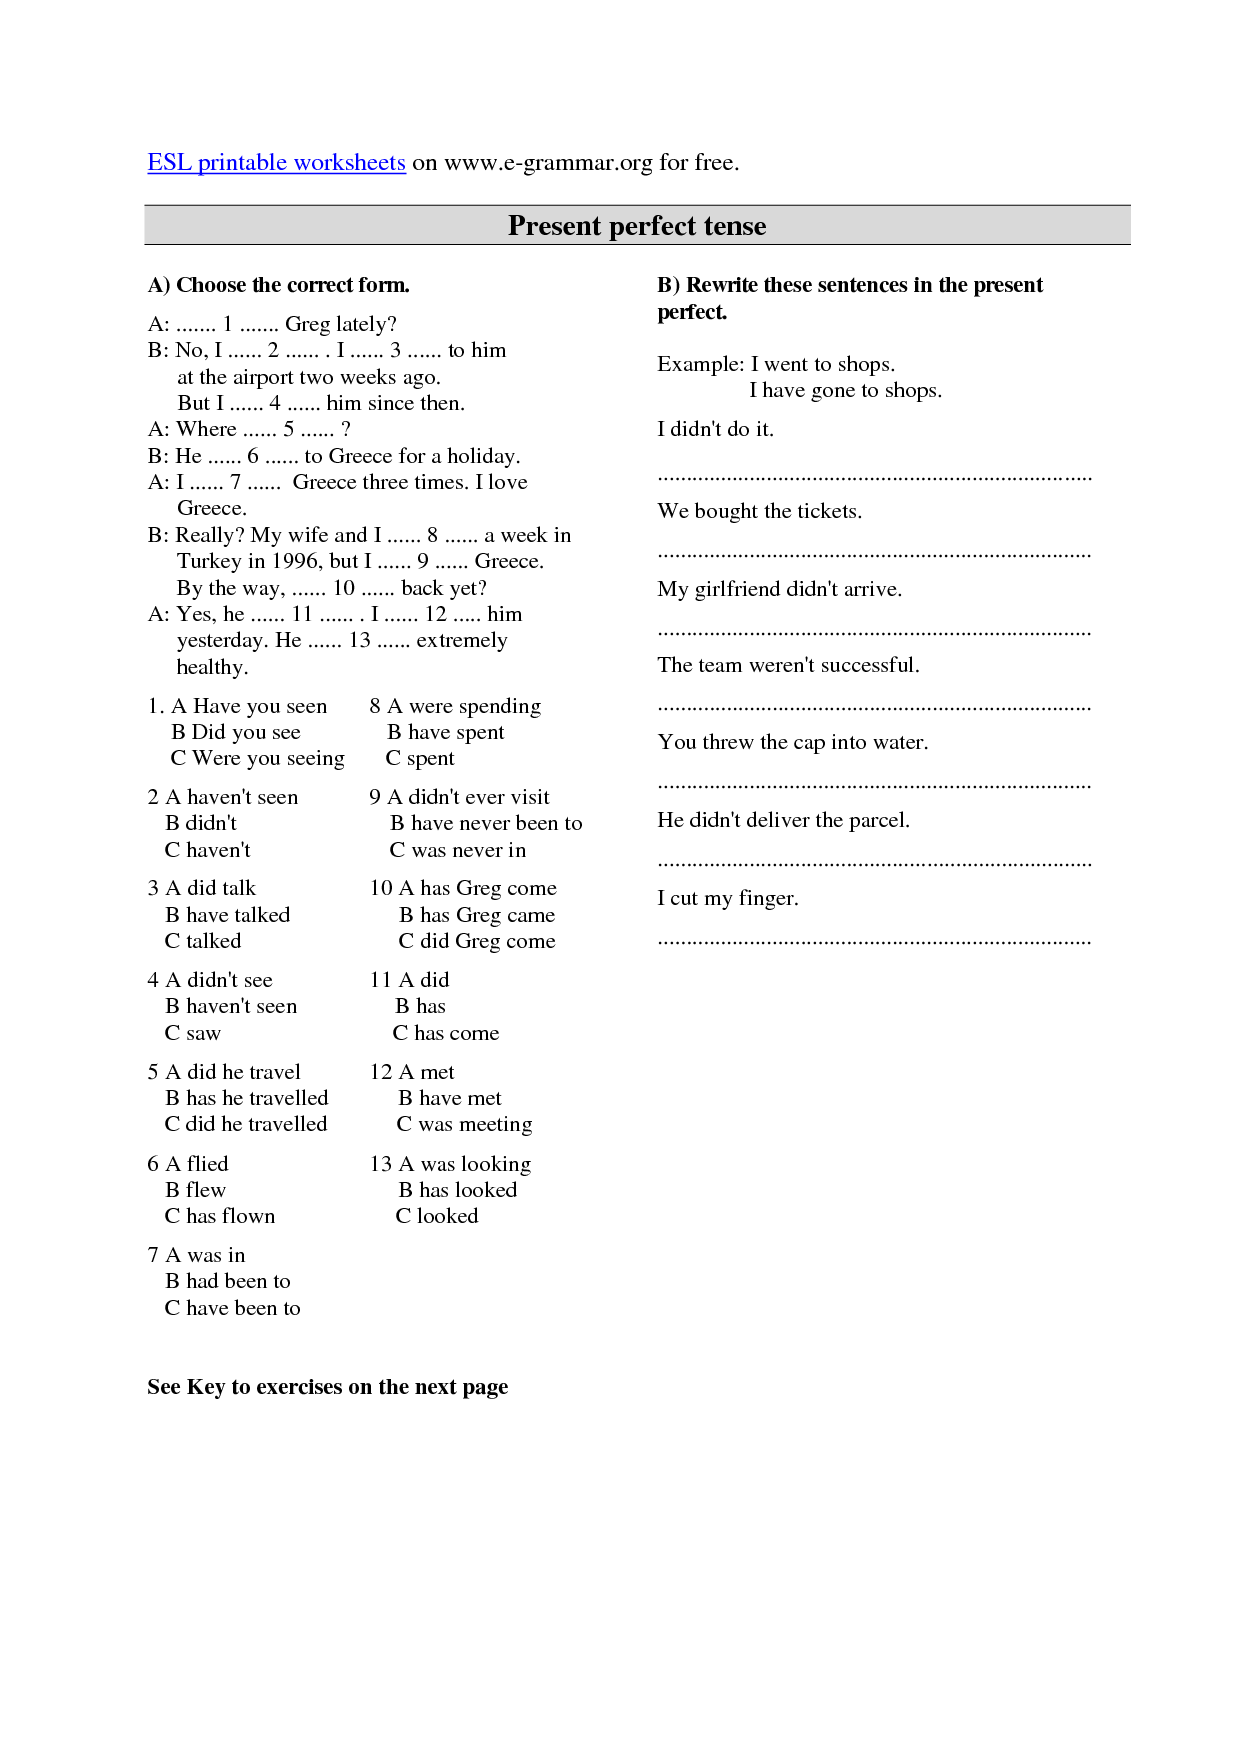 9-best-images-of-present-perfect-practice-worksheets-spanish-present-perfect-tense-worksheet